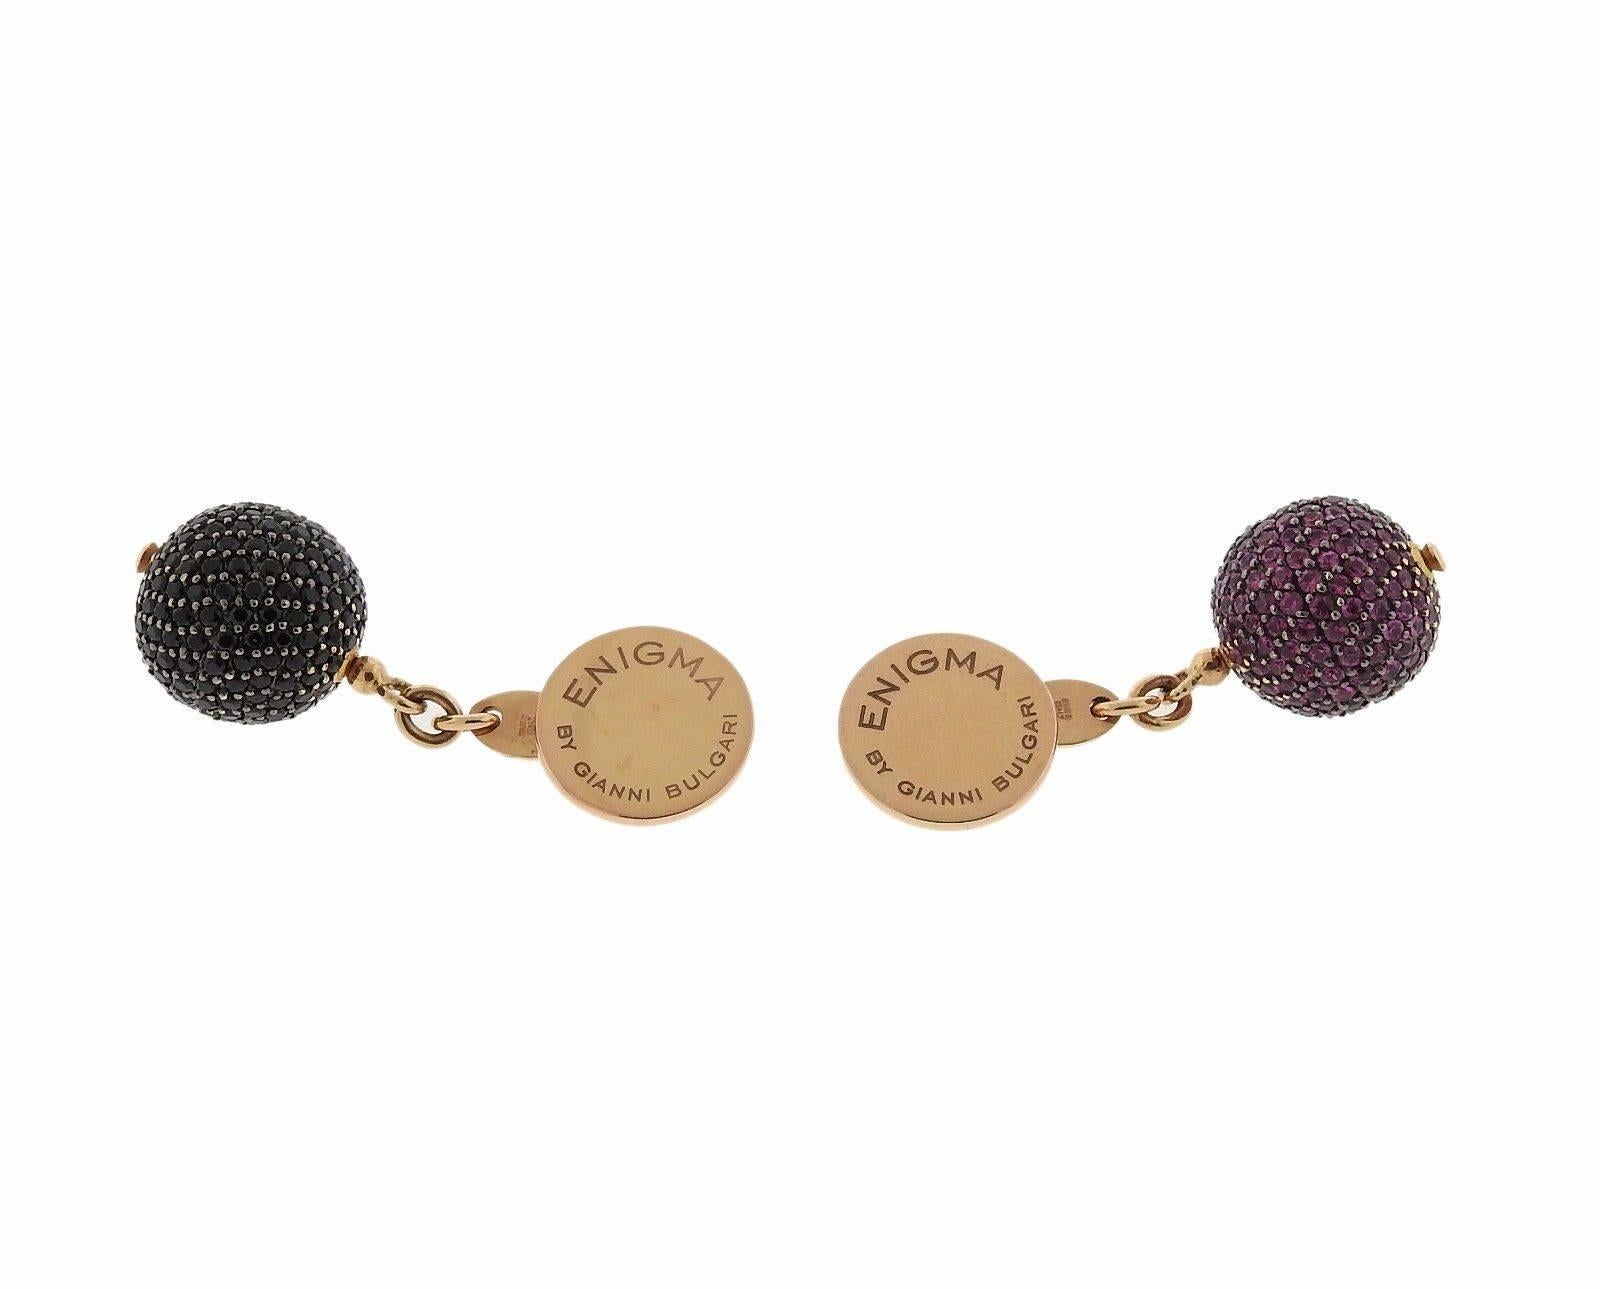 A pair of 18k gold cufflinks set with black spinel and pink sapphires.  The cufflnks measure 12mm and weigh 12.5 grams.  Marked: Enigma by Gianni Bulgari ,  750 , made in Italy, 1498 AR.  The retail for this pair is $4100.